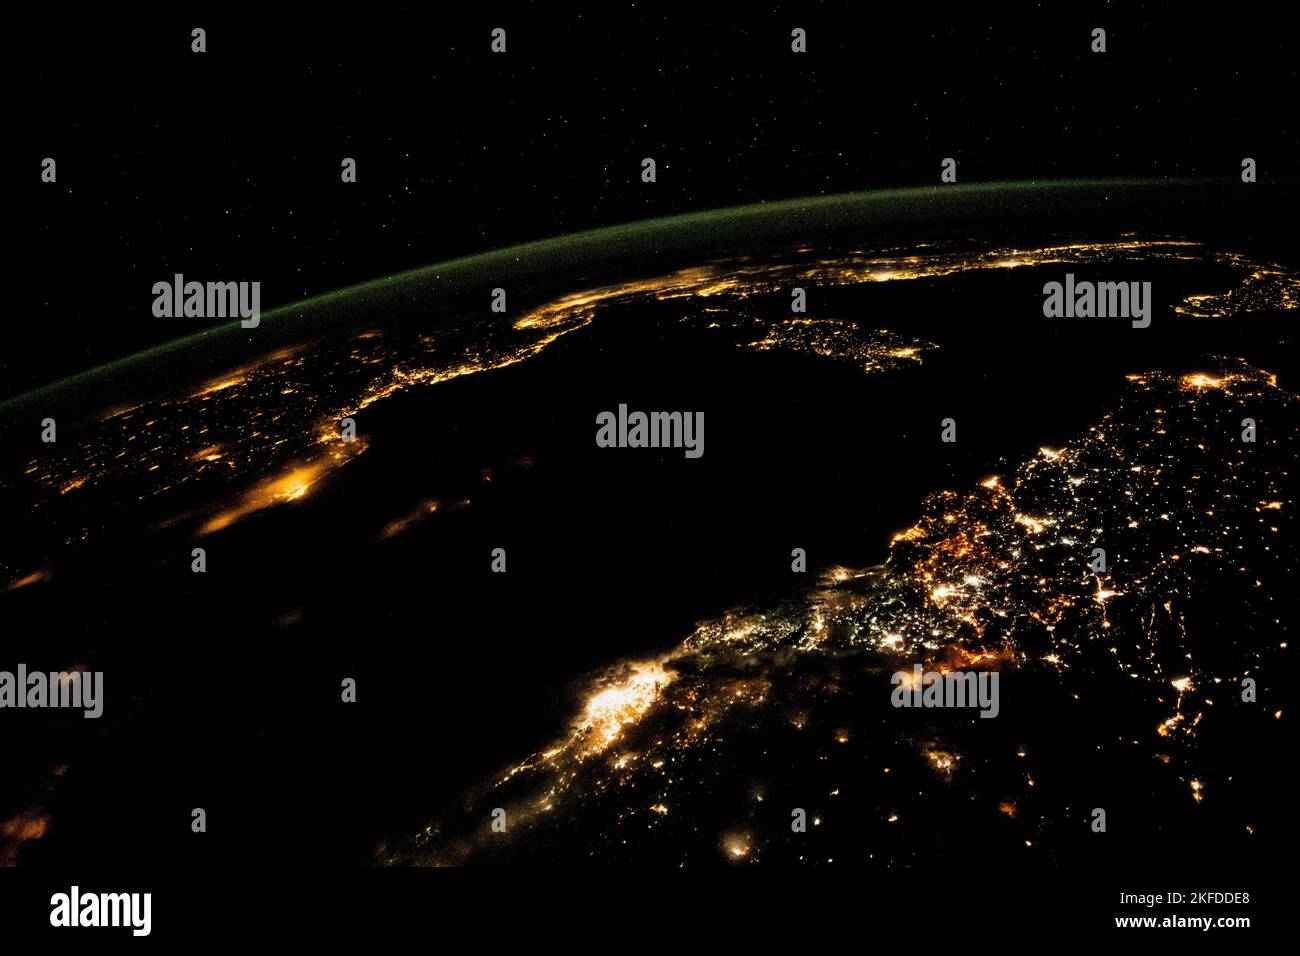 Aerial view, cities light up the night view from space. Mediterranean Sea from north Africa to southern Europe. Elements of image furnished by NASA. Stock Photo